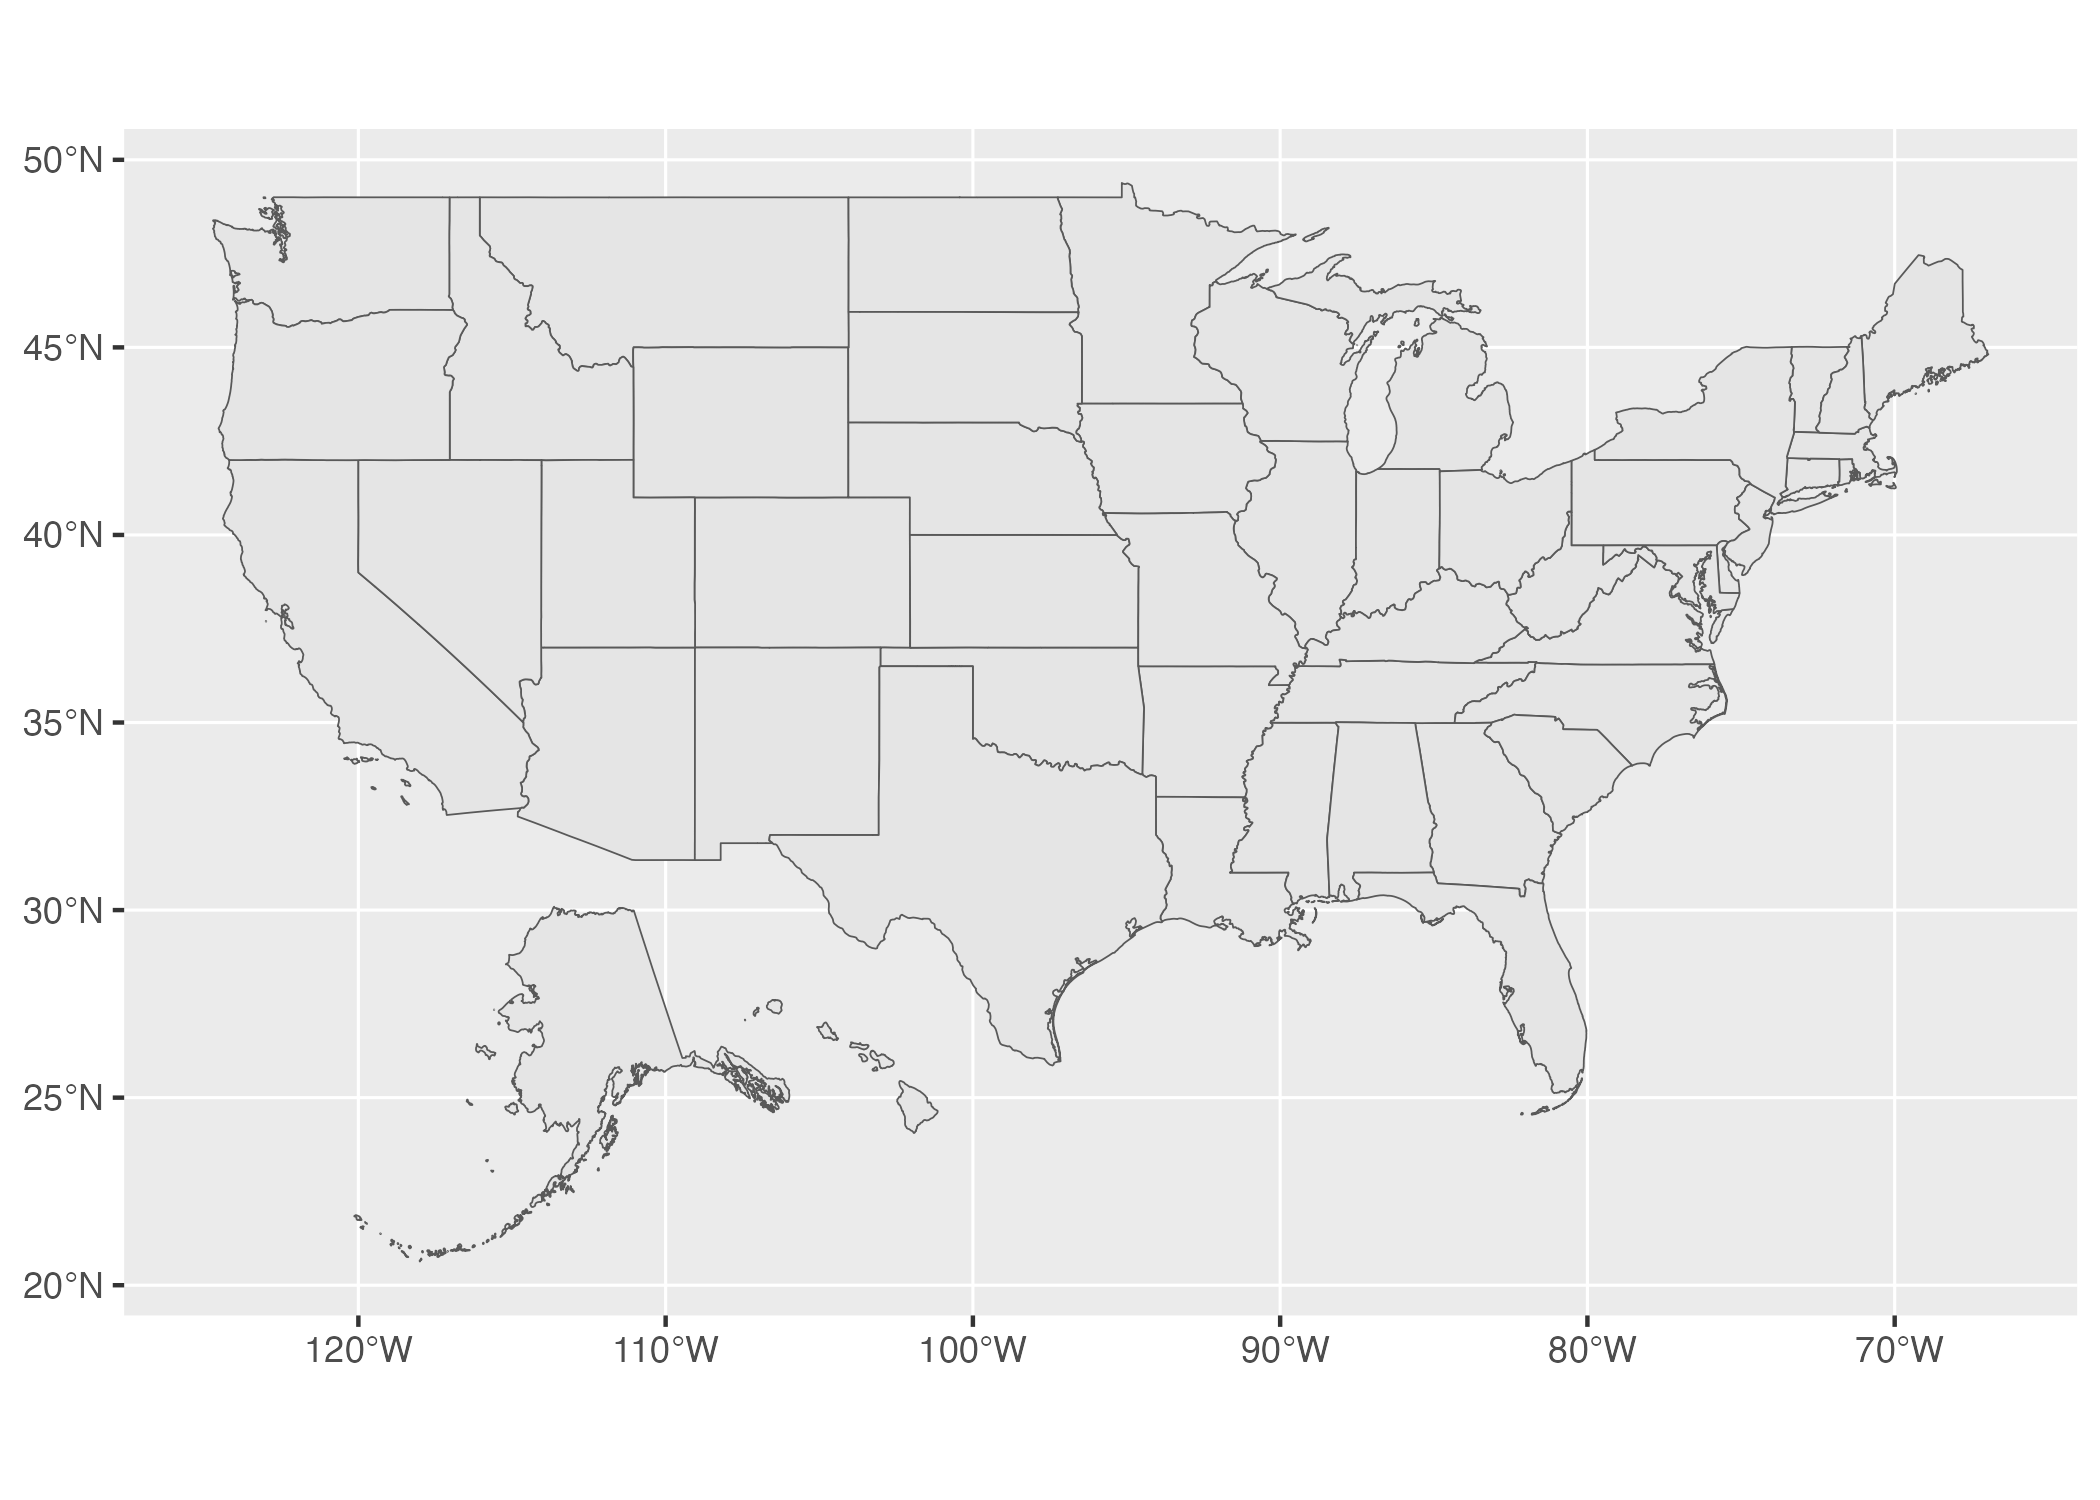 A map of the United States using the WGS84 projection